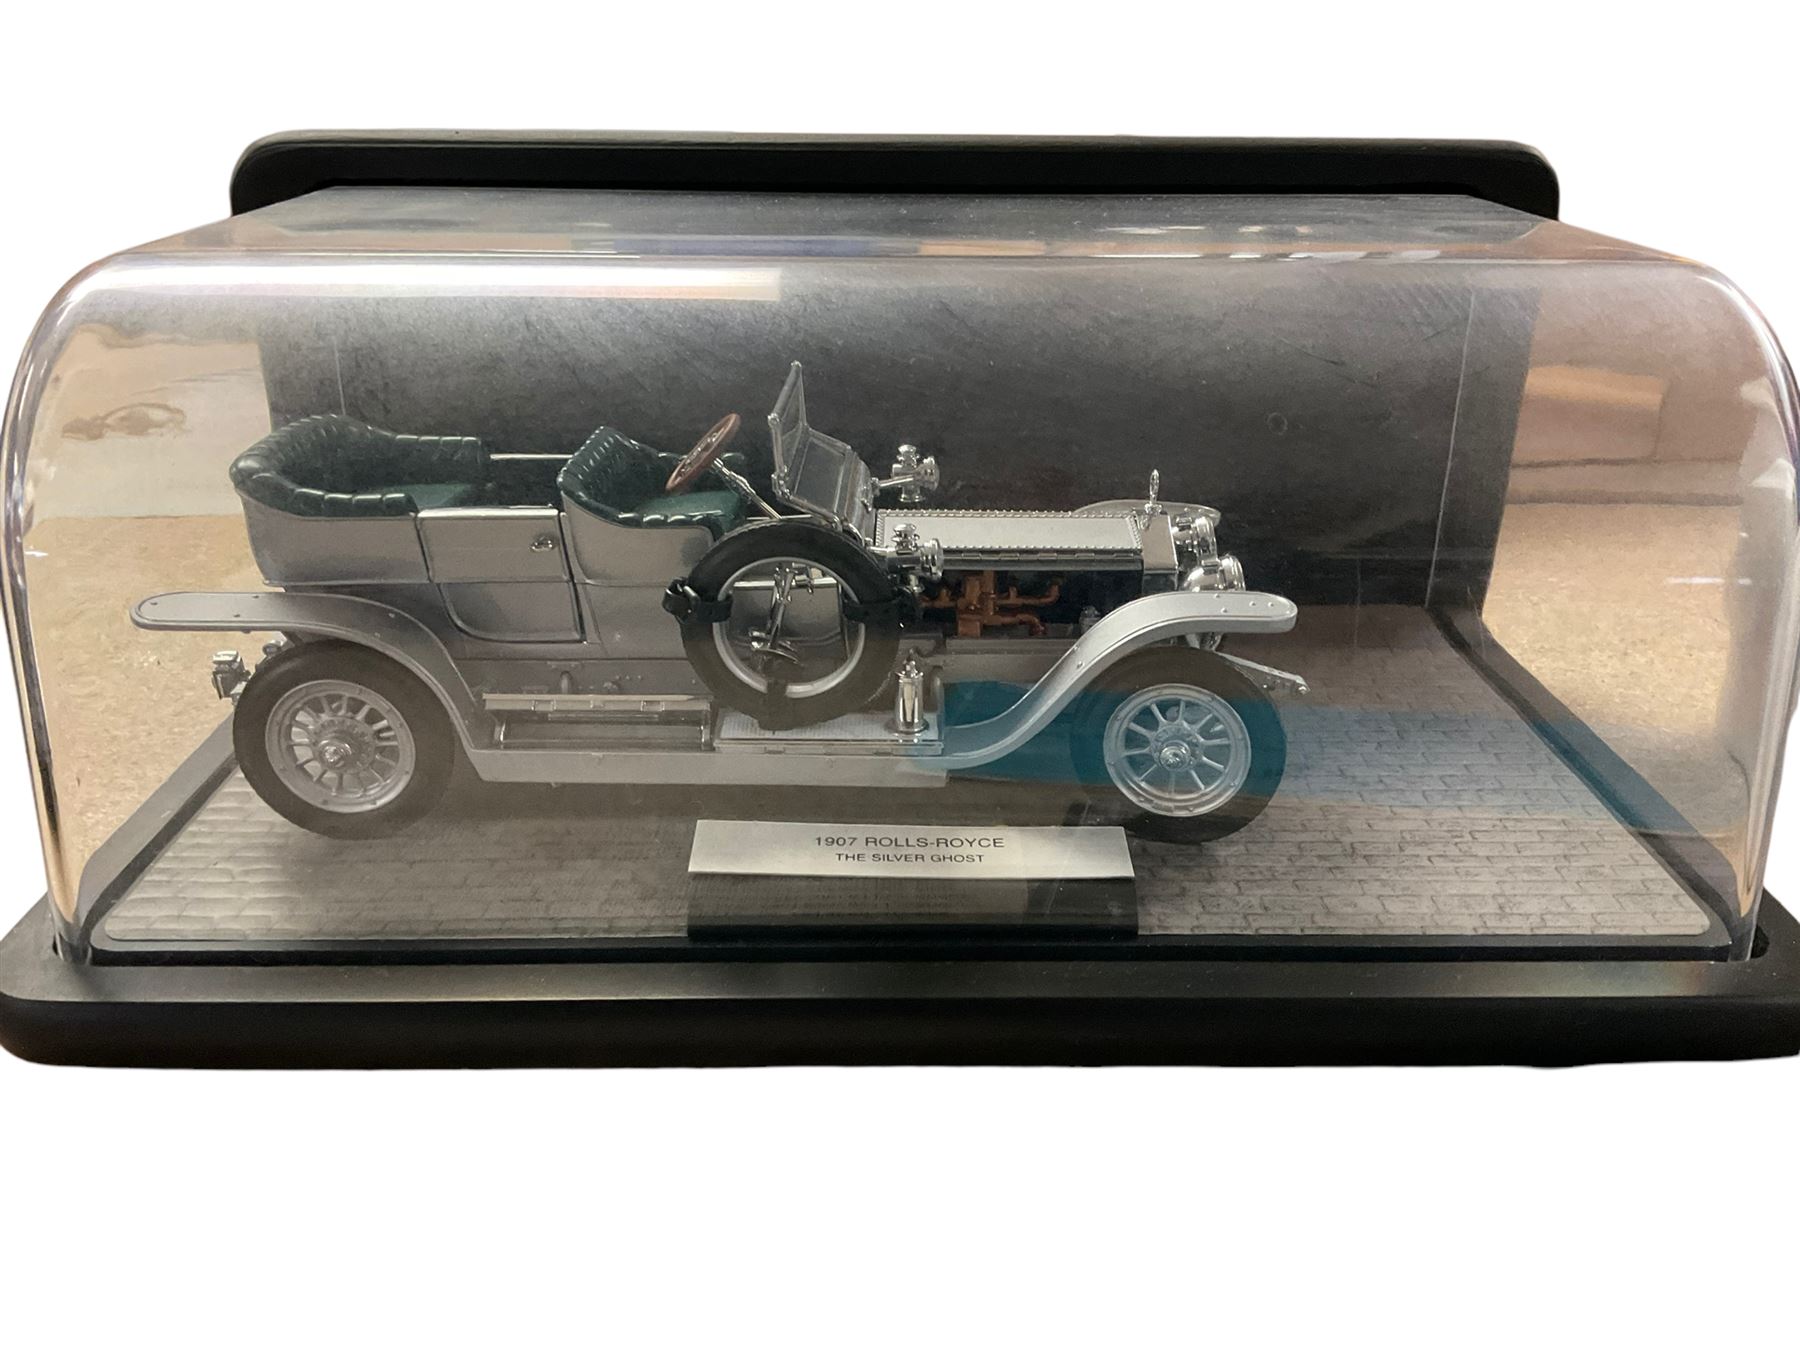 1907 Rolls Royce Silver Ghost cased - Image 2 of 5